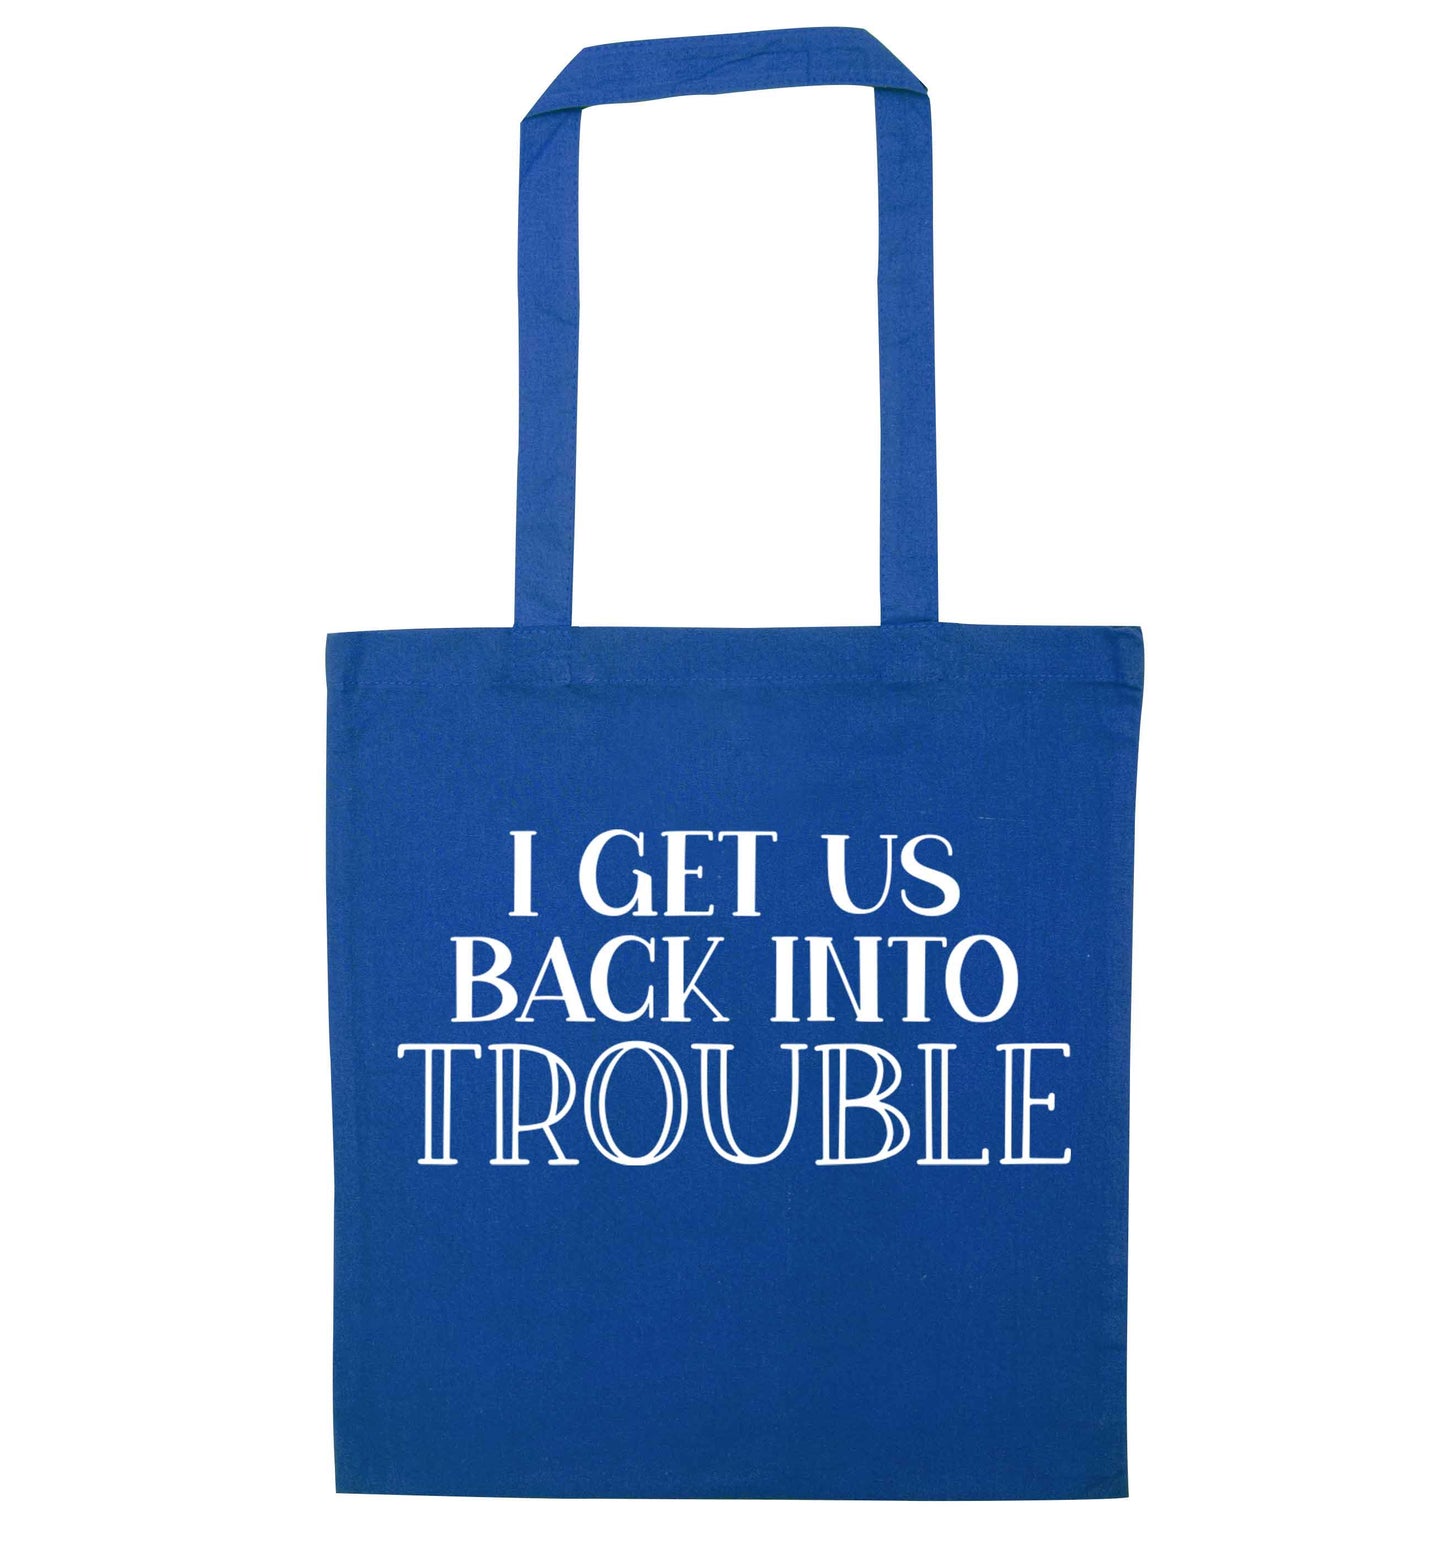 I get us back into trouble blue tote bag